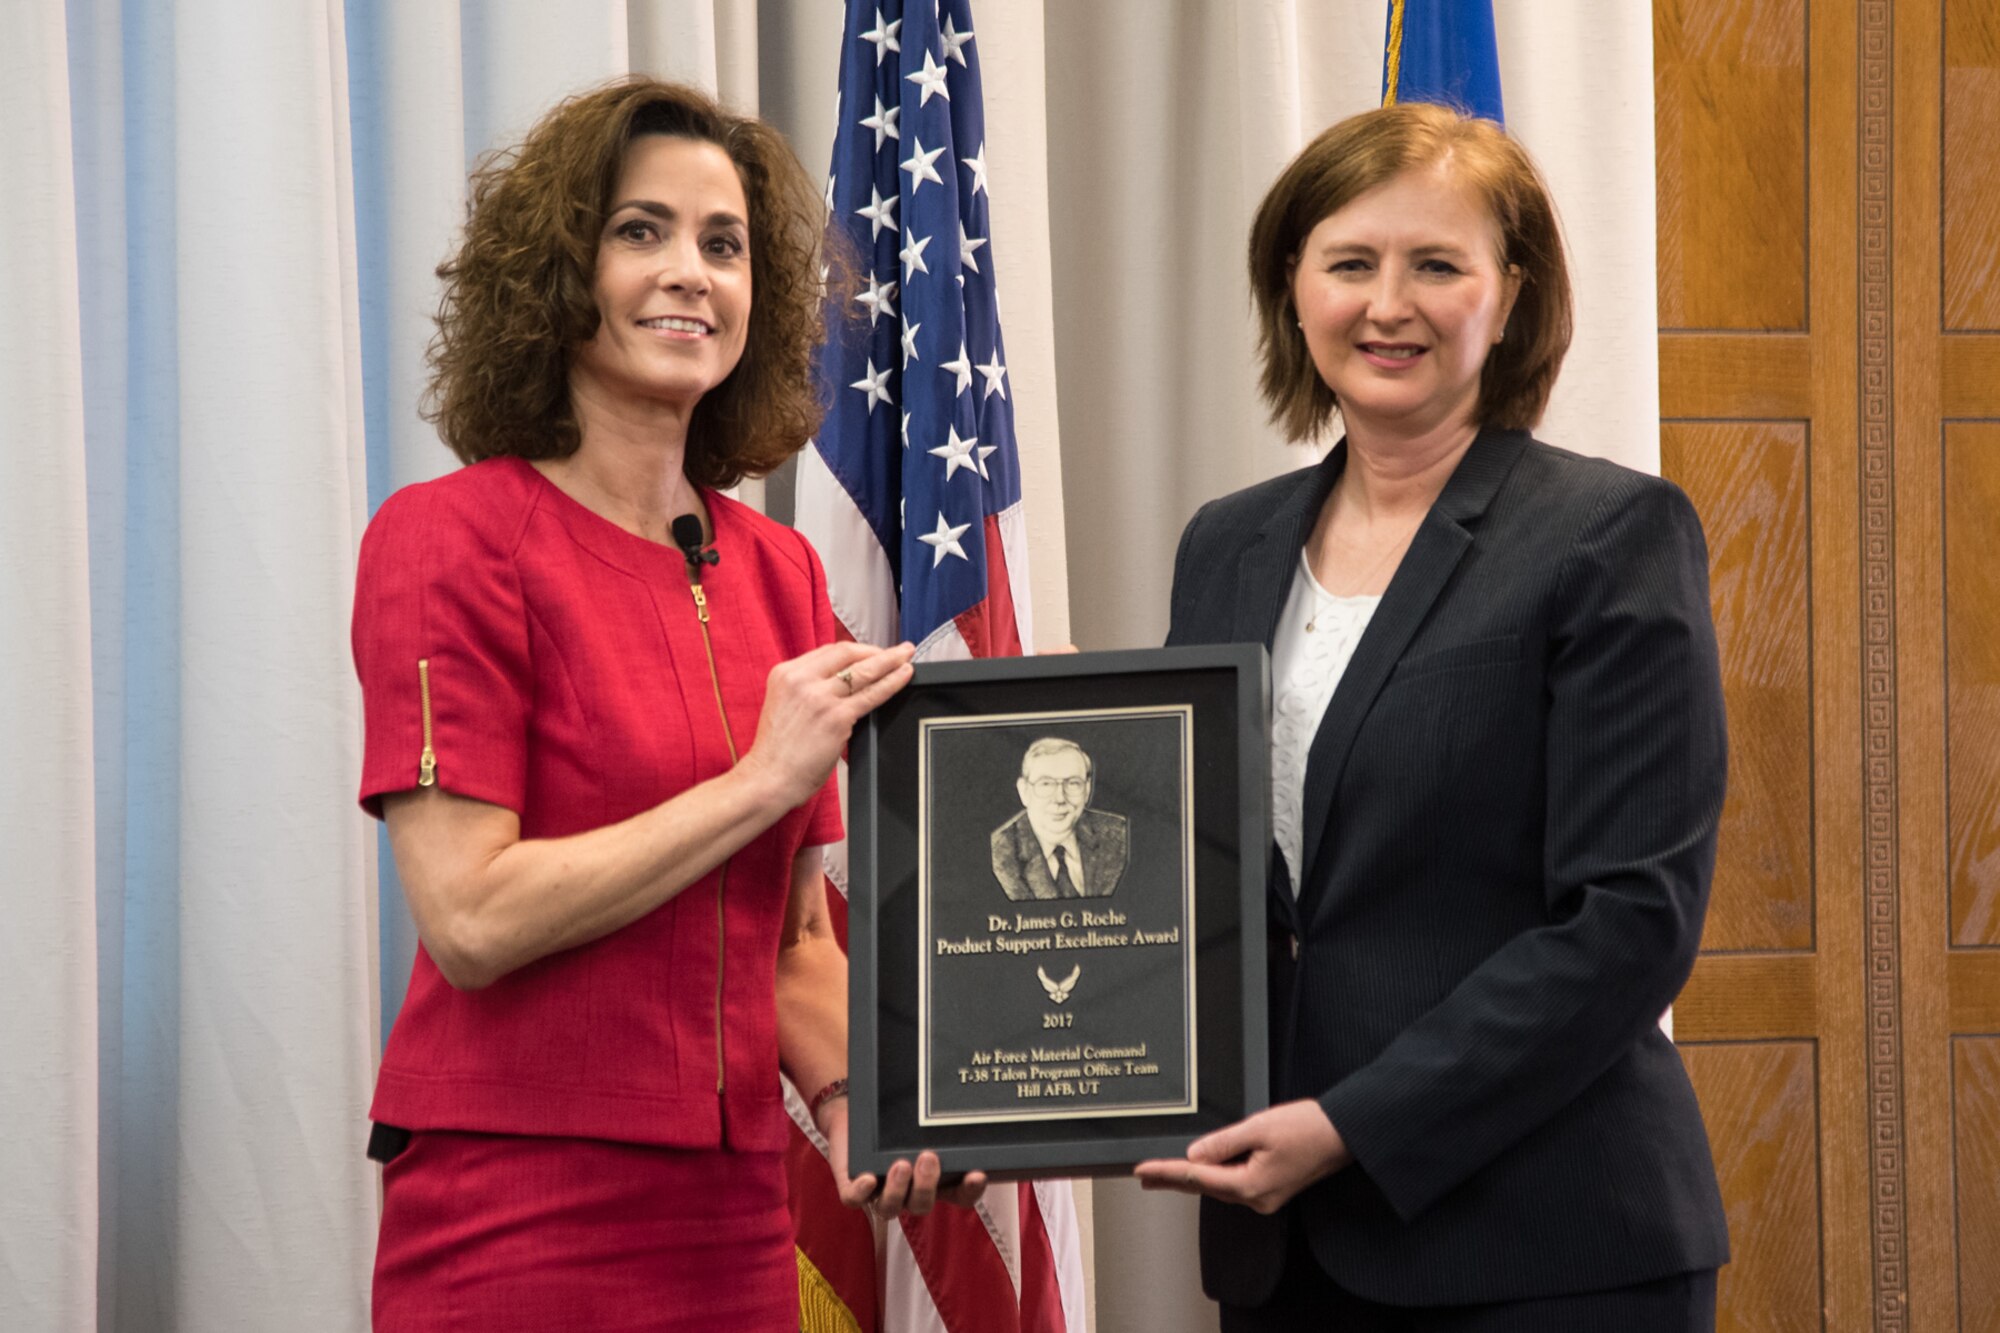 Lynda Rutledge (left), the Mobility and Training Aircraft Directorate Program Executive Officer, presented the 2017 Dr. James G. Roche Sustainment Excellence Award to Angela Micheal, T-38 Program Manager, May 8, 2018, at Hill Air Force Base, Utah. Micheal accepted the award on behalf of the Air Force Life Cycle Management Center T-38 Program Office. (U.S. Air Force photo)